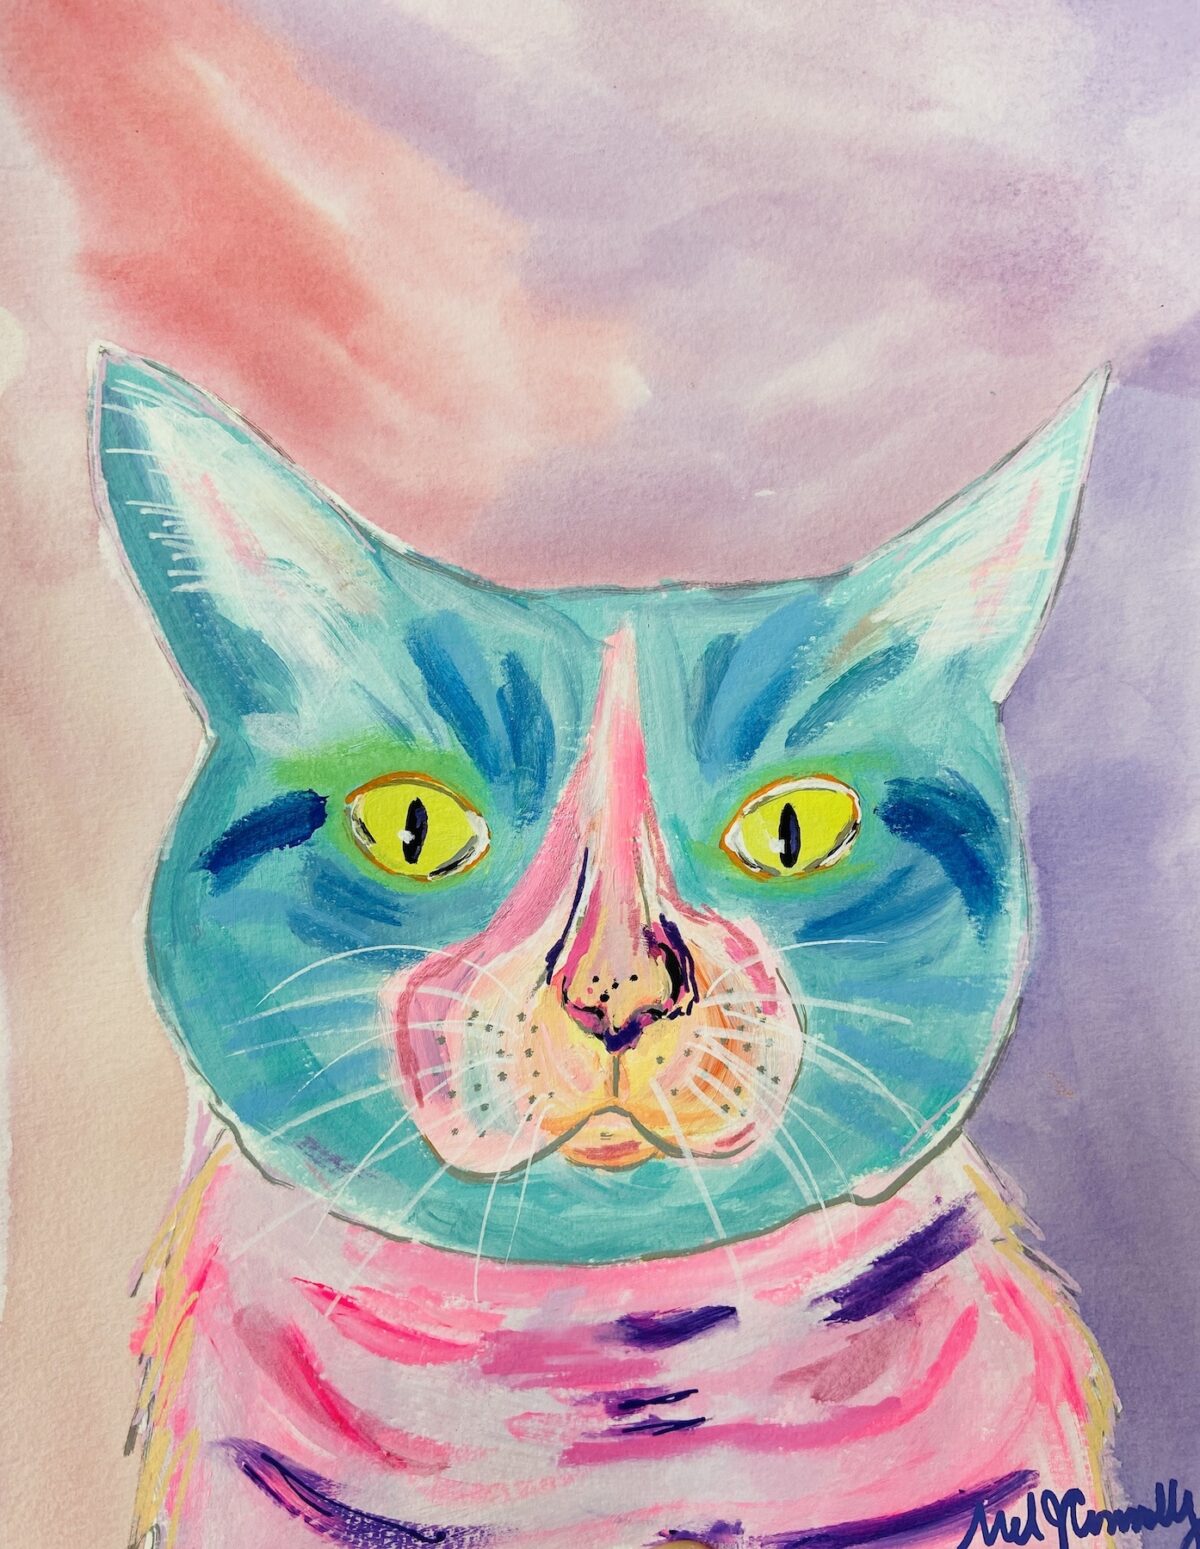 Cat Study - Rufus - Acrylic on watercolor paper